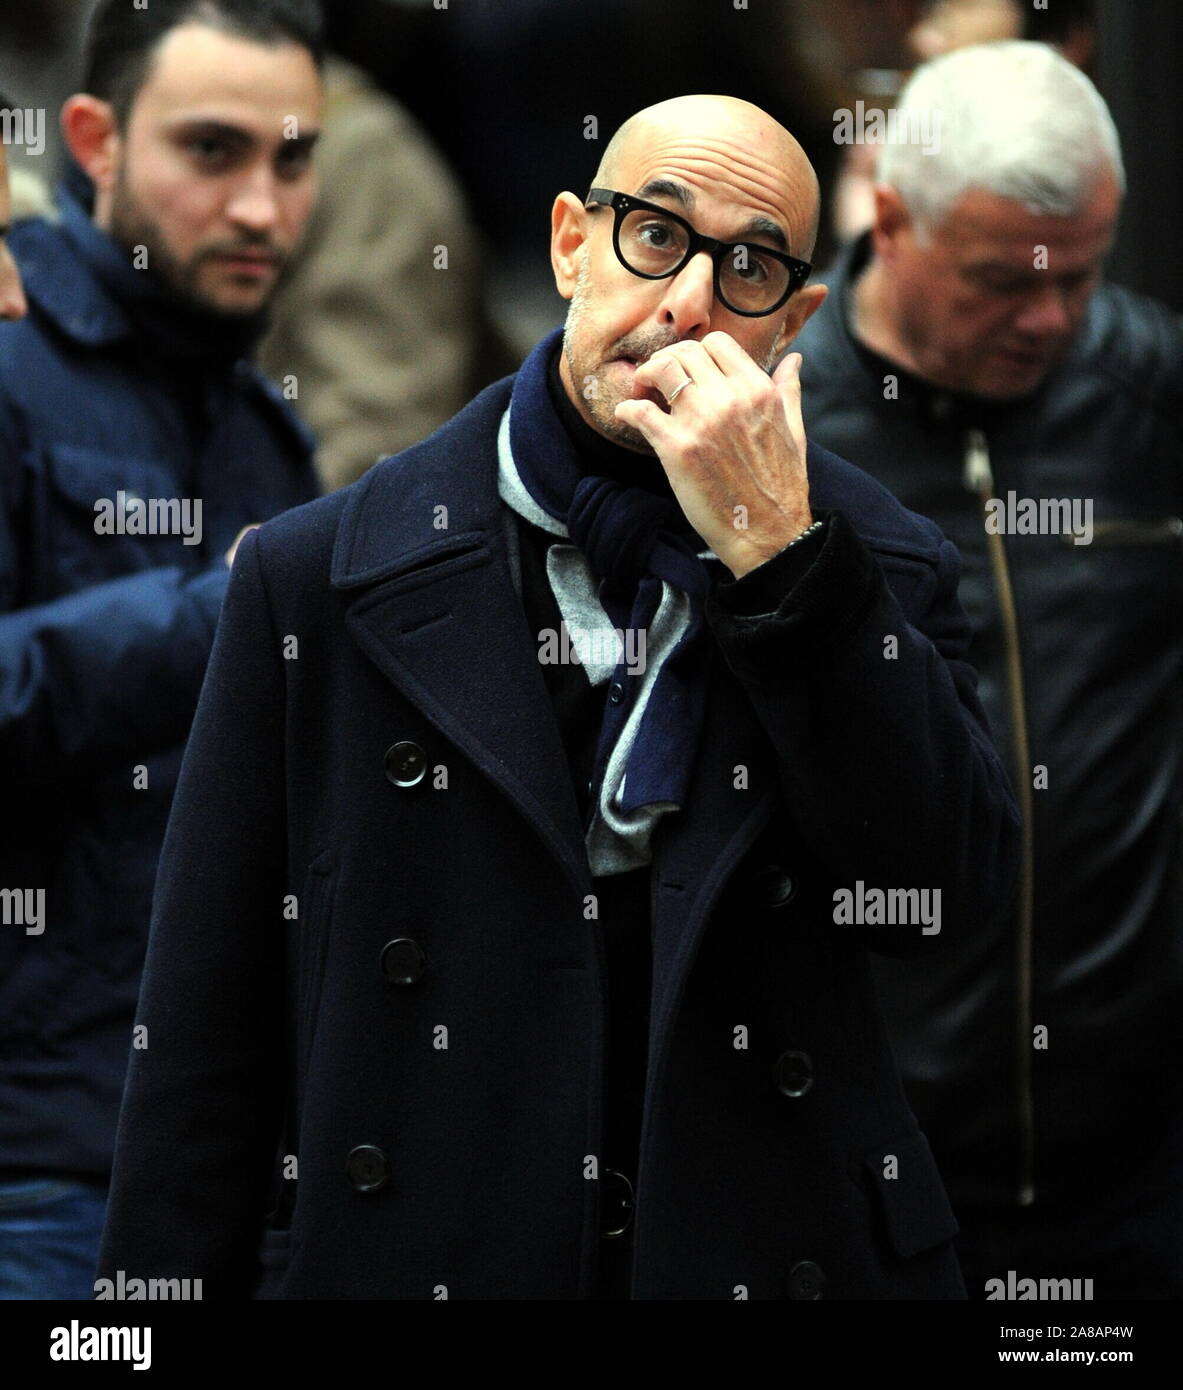 EXCLUSIVE SPECIAL FEE * Milan, Italy. 7th Nov 2019. Stanley Tucci makes a  documentary film for CNN in the center Stanley Tucci, an American actor and  director of Italian descent, winner